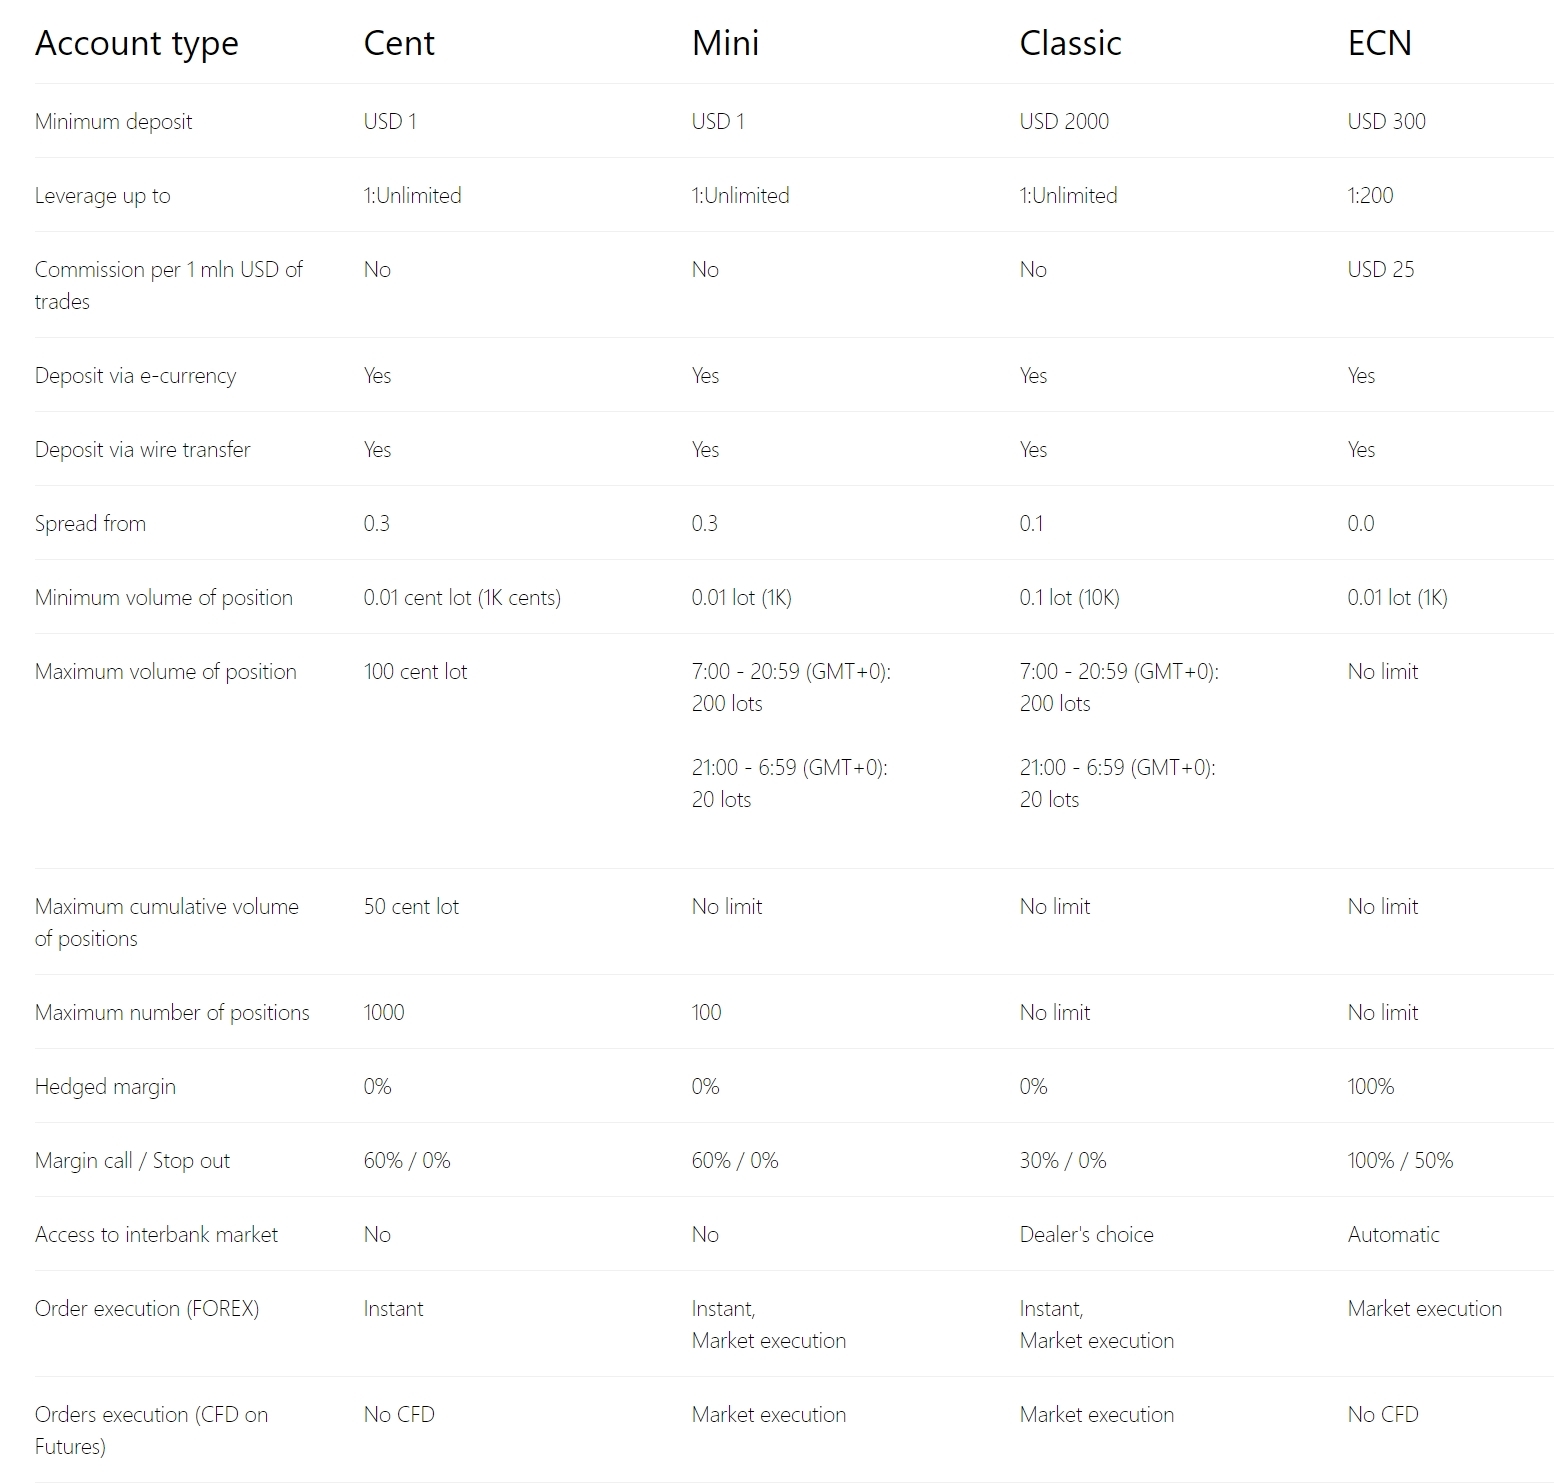 Exness Account Types